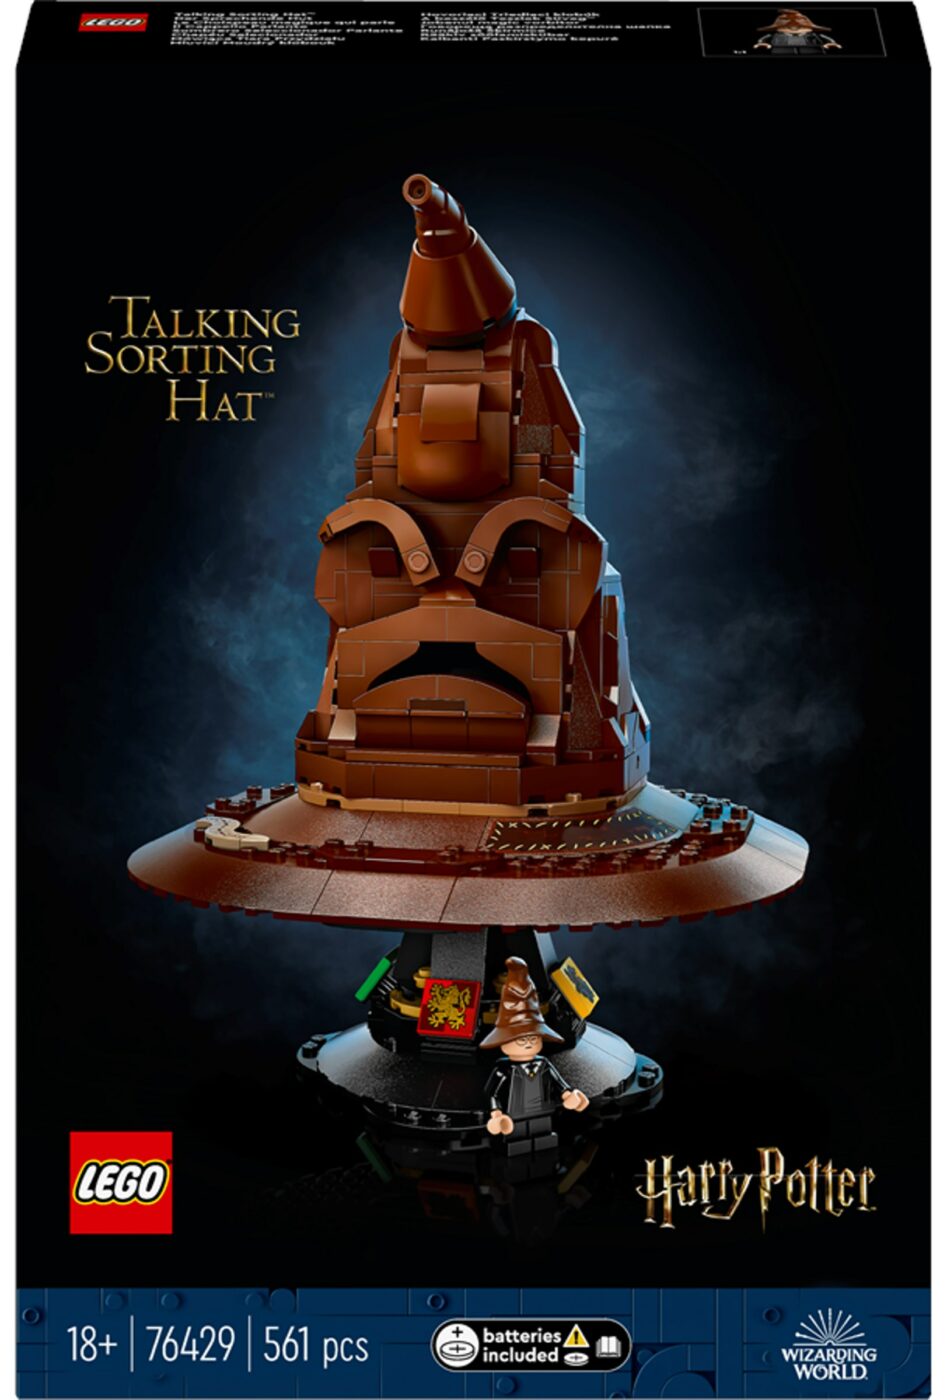 LEGO Harry Potter 76429 Talking Sorting Hat comes with a sound brick!0